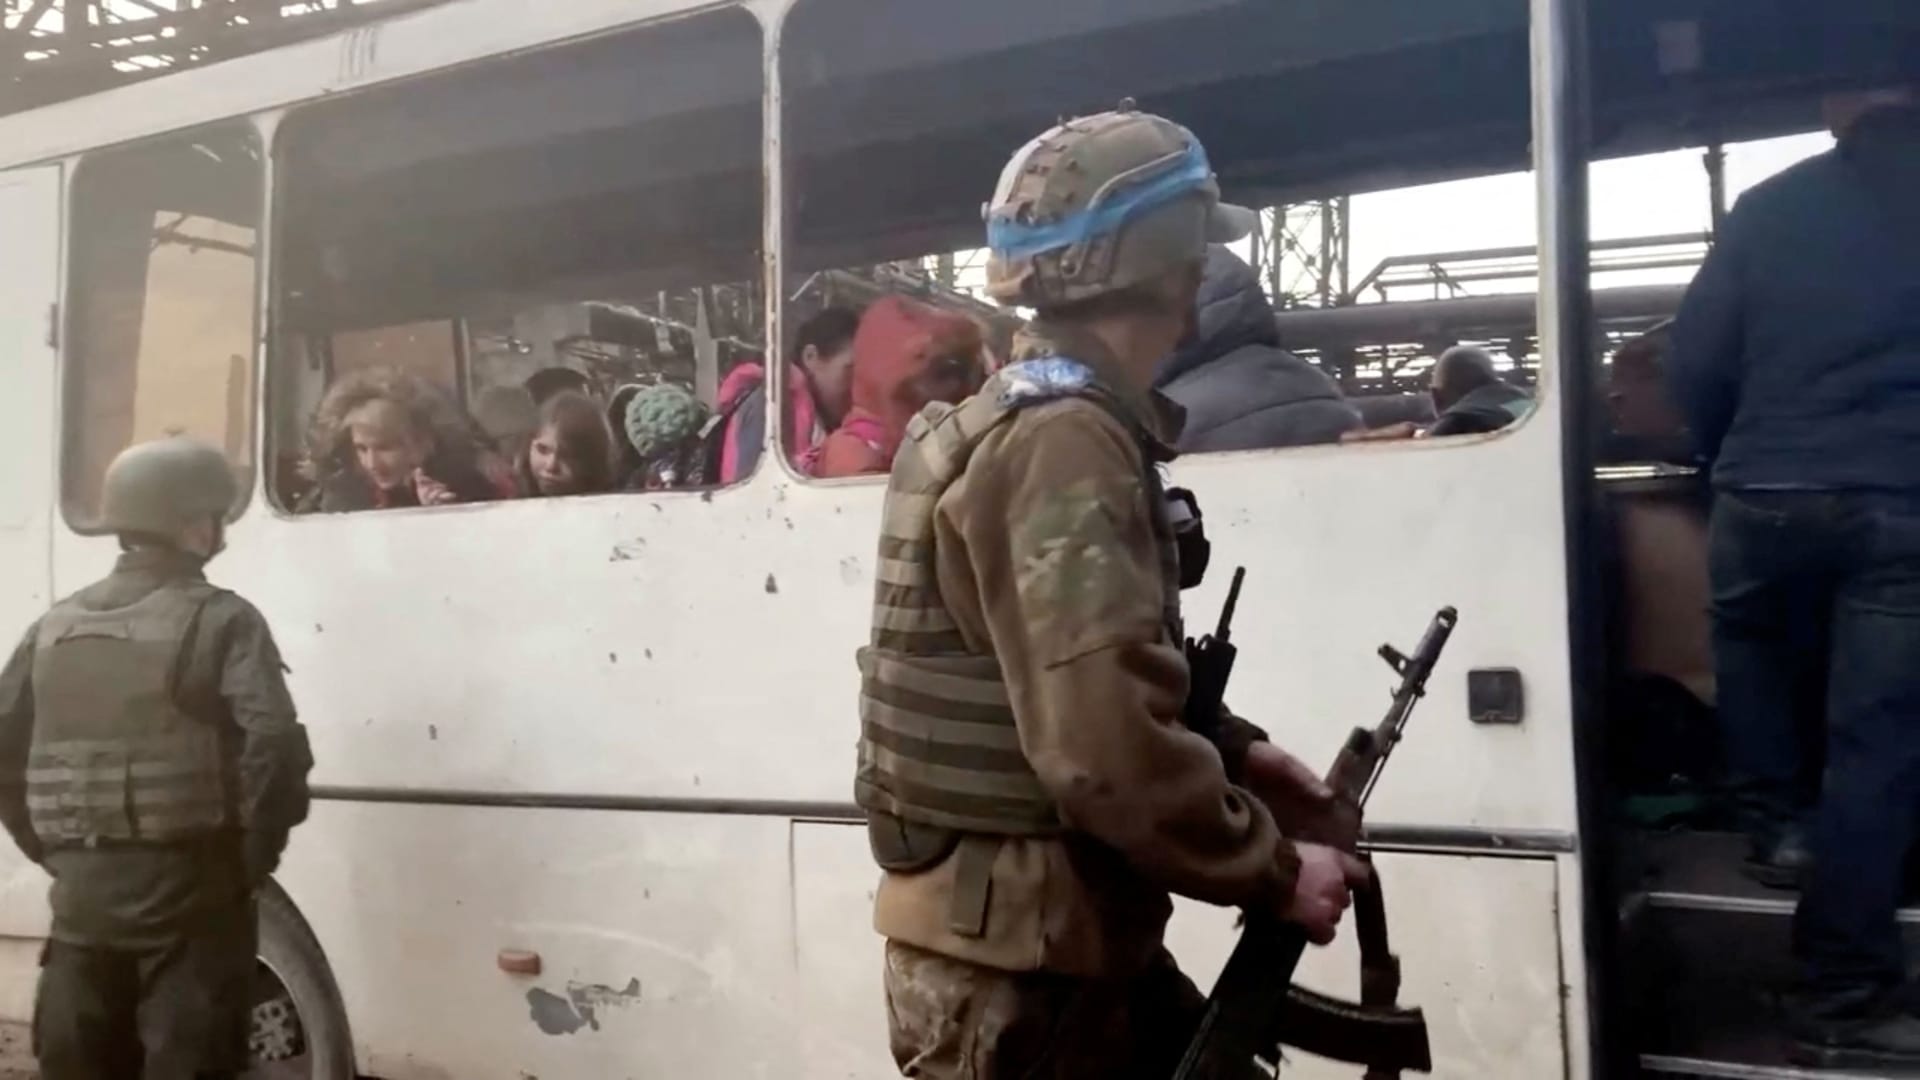 Azov regiment members stand as civilians board a bus at the Azovstal steel plant during UN-led evacuations, after nearly two months of siege warfare on the city by Russia during its invasion, in Mariupol, Ukraine in this still image from handout video released May 1, 2022. David Arakhamia/Azov Regiment/Handout via REUTERS THIS IMAGE WAS PROVIDED BY A THIRD PARTY. MANDATORY CREDIT. NO RESALES. NO ARCHIVES.